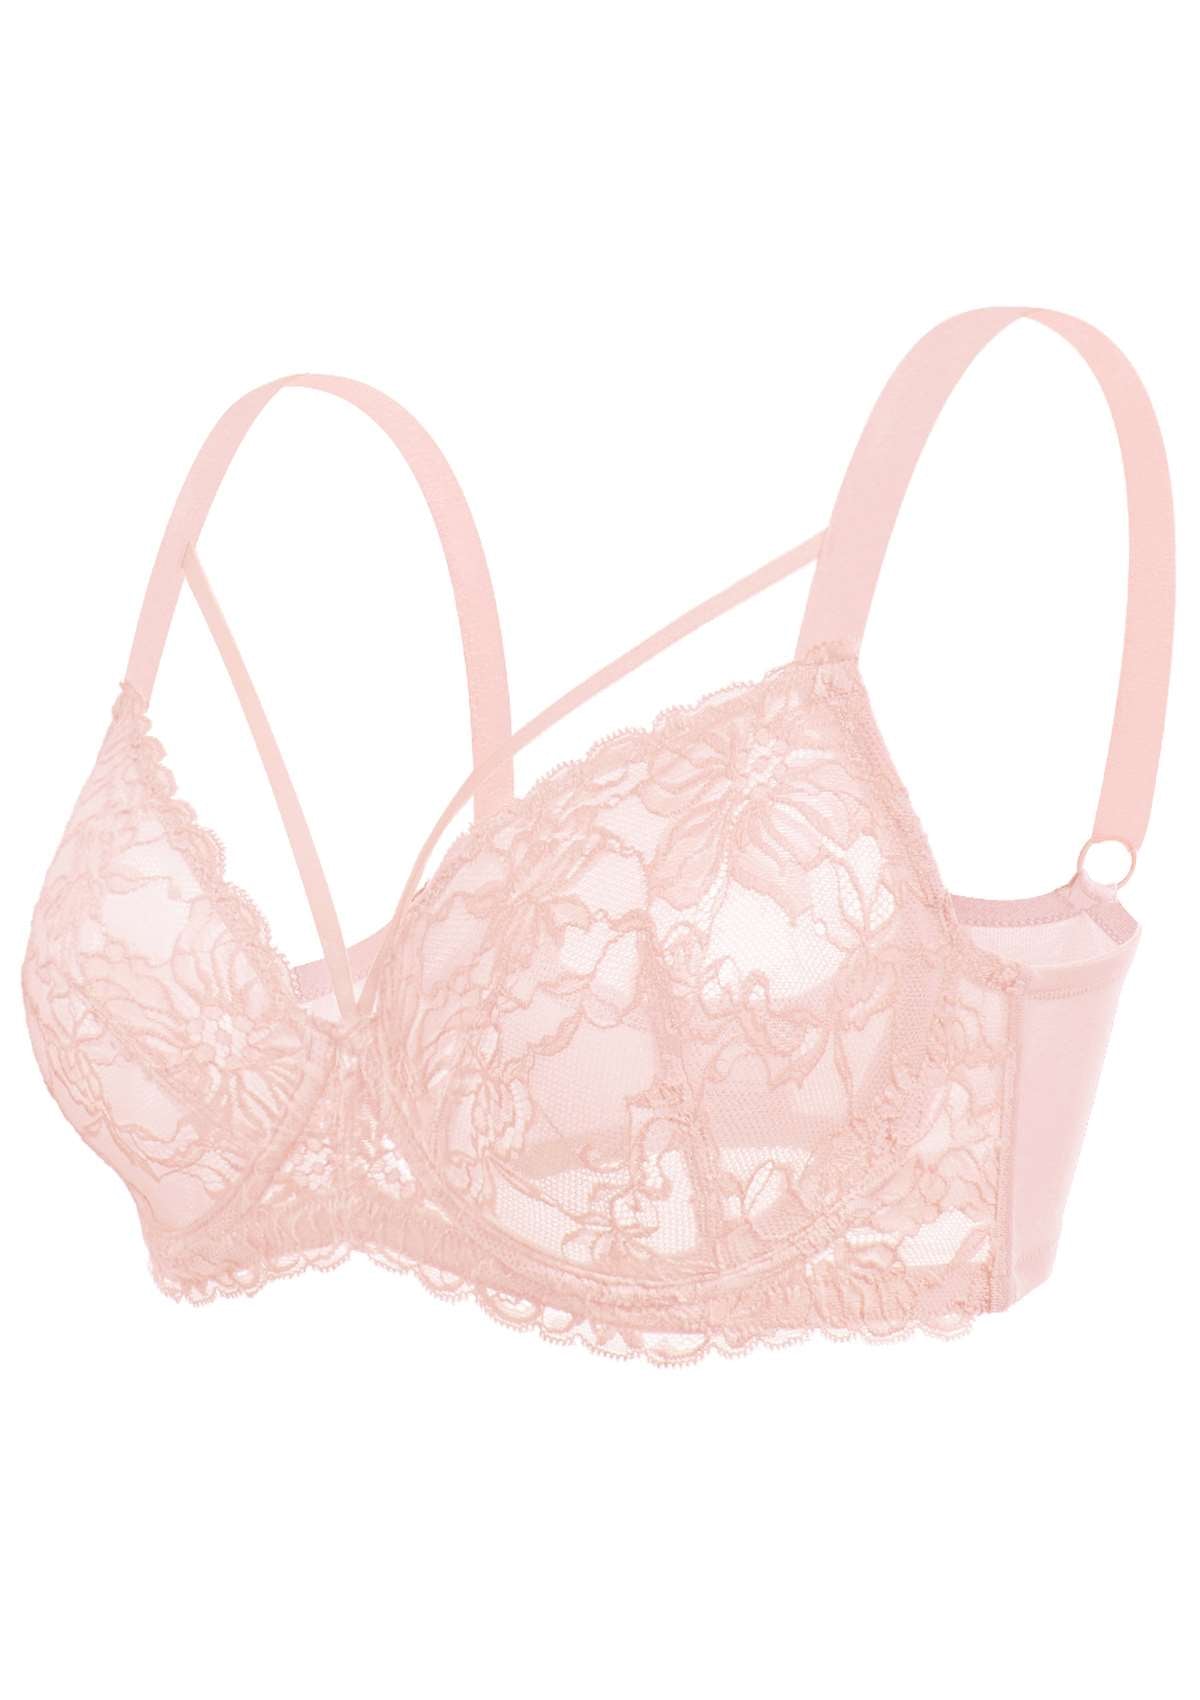 HSIA Pretty In Petals: Strappy Lace Sheer Bra For Side And Back Fat - Beige Cream / 42 / G